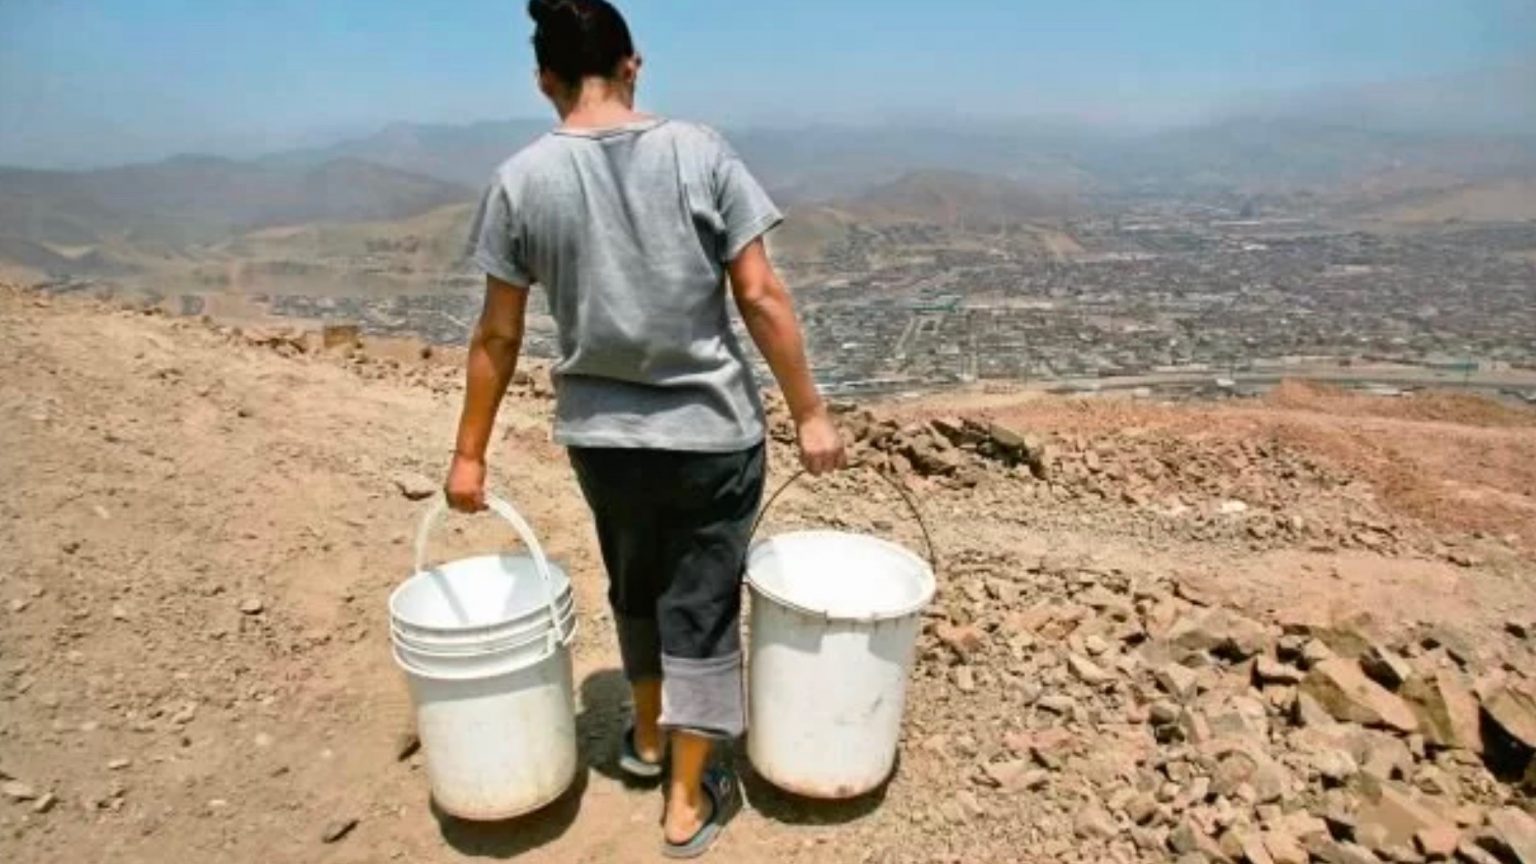 Peruvians Fight the COVID-19 Outbreak Amid Water Crisis and Neoliberalism - NewsClick